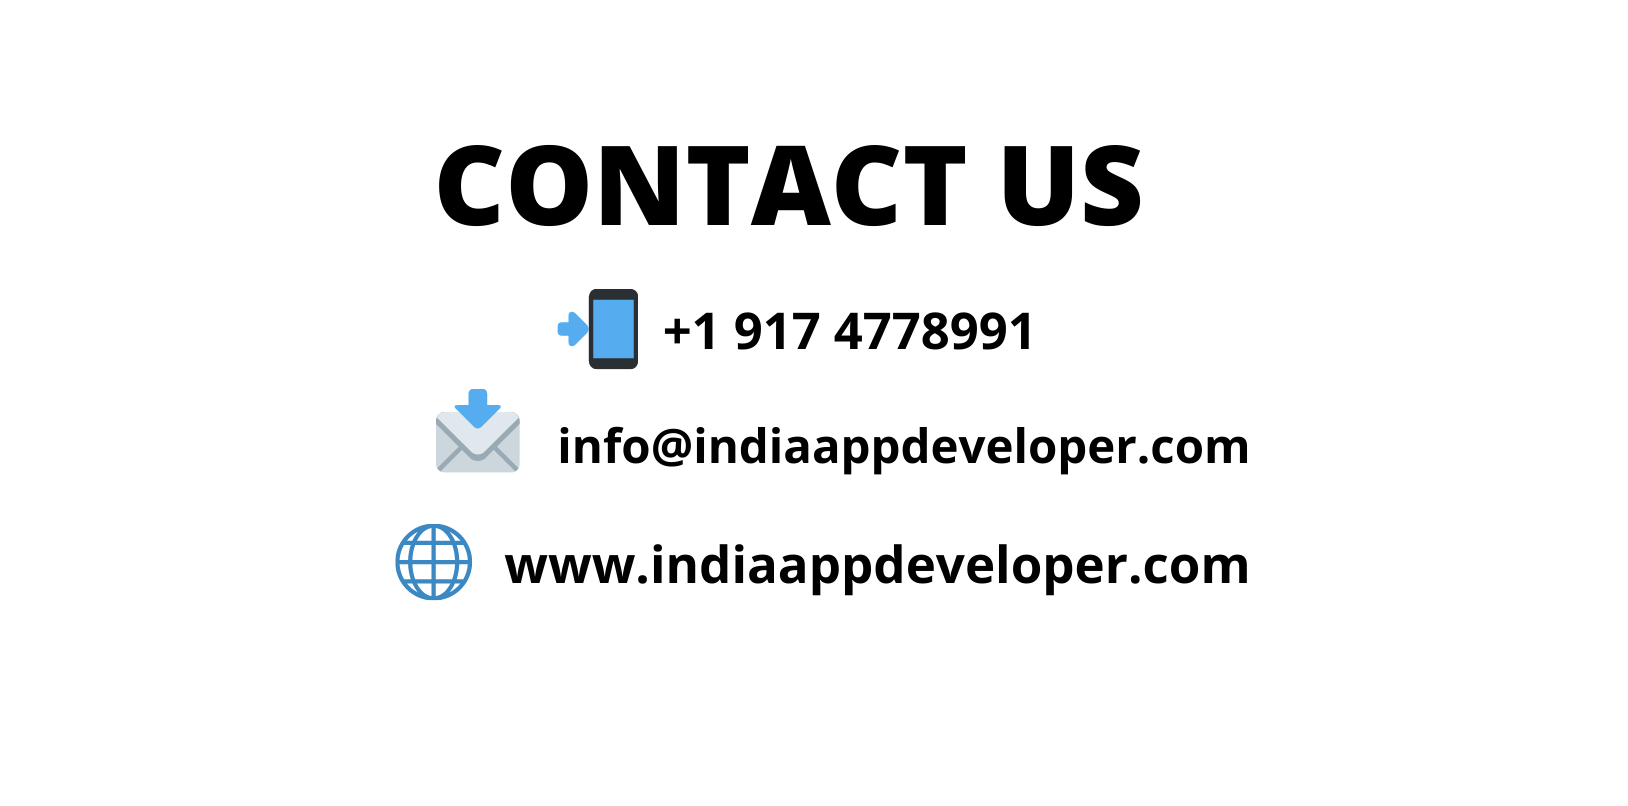 Top-rated Mobile App Development Company in India